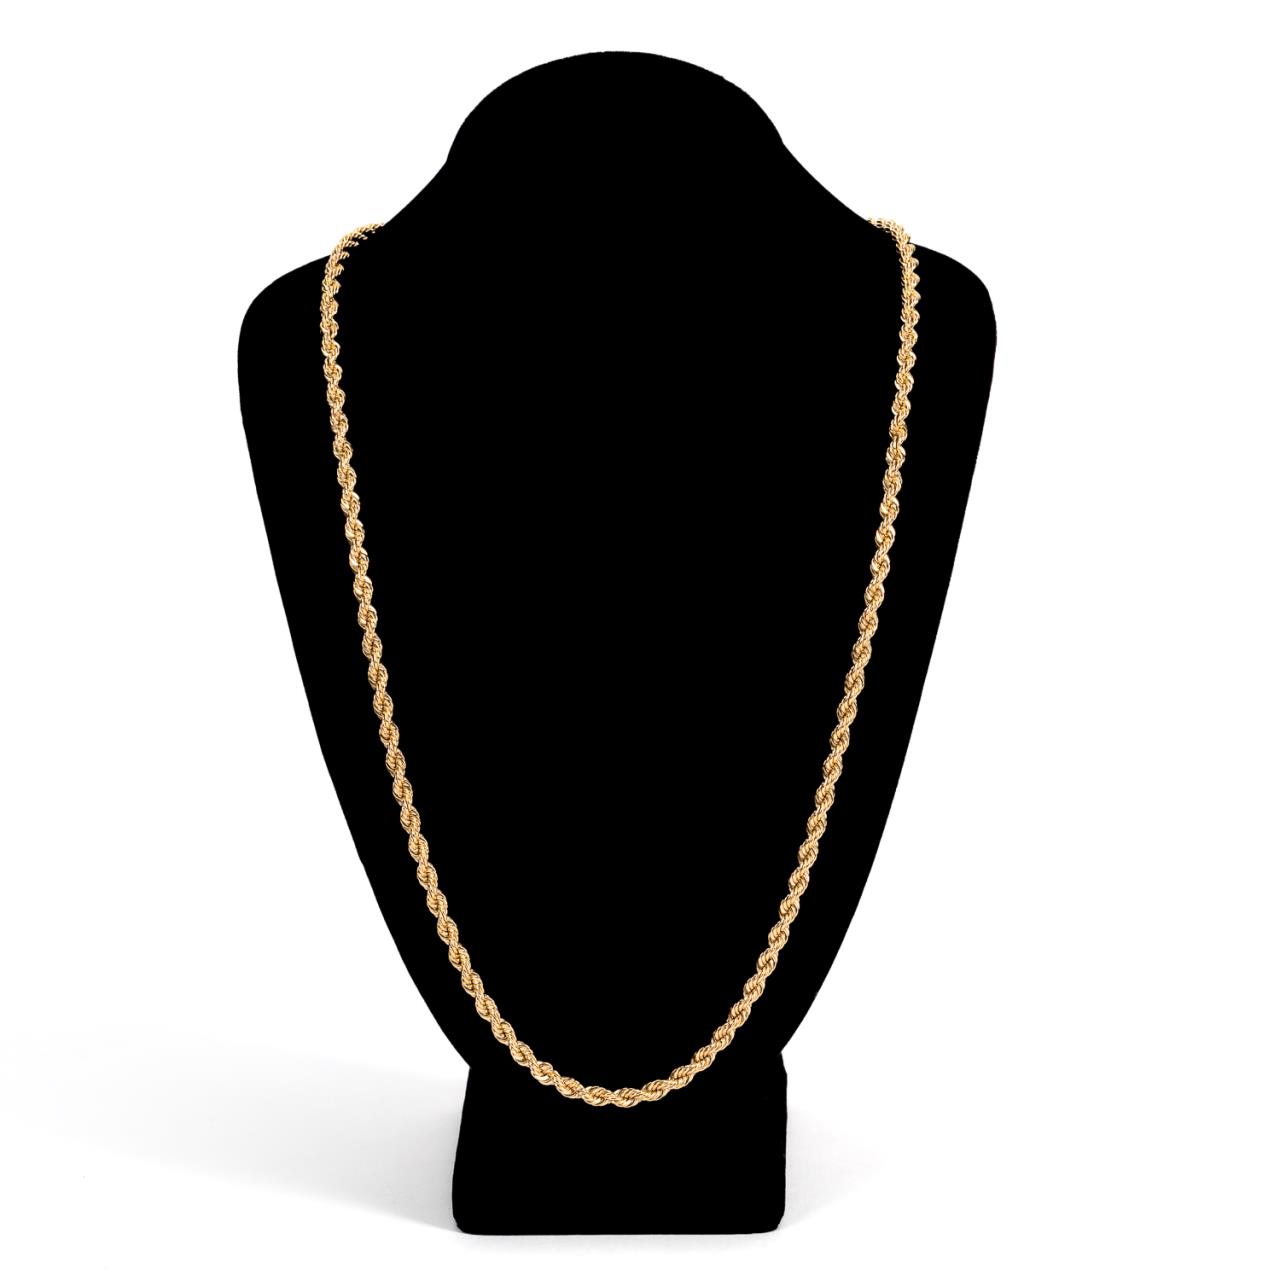 14K YELLOW GOLD ROPE CHAIN NECKLACE,